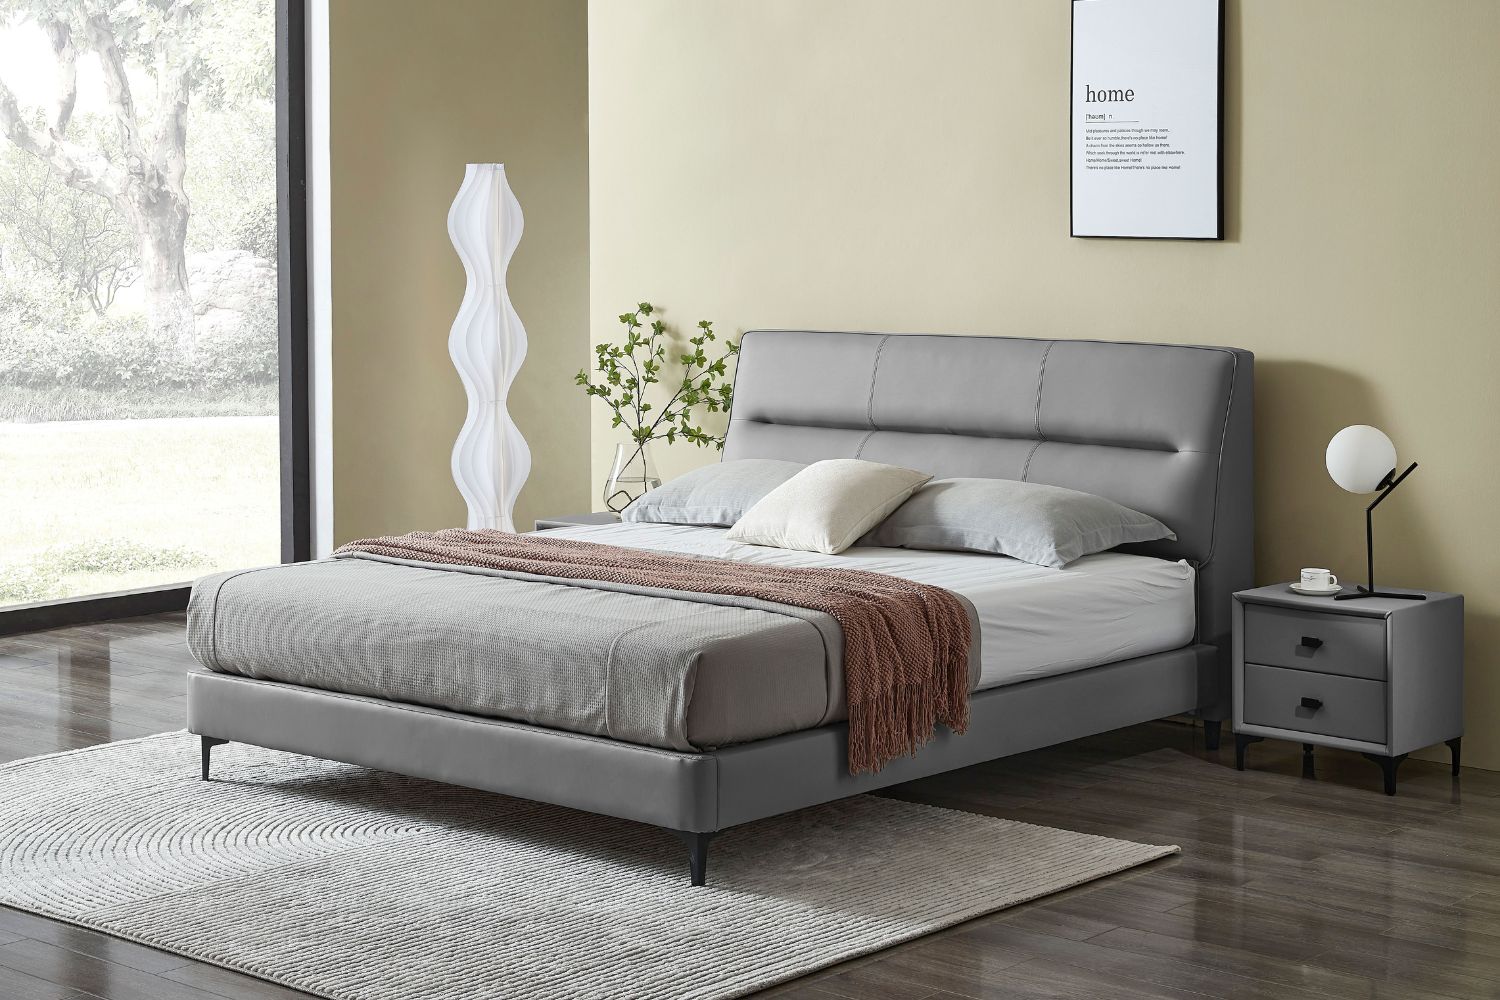 CUBA Genuine Leather Bed Frame in Queen/King Size (Dark Grey)